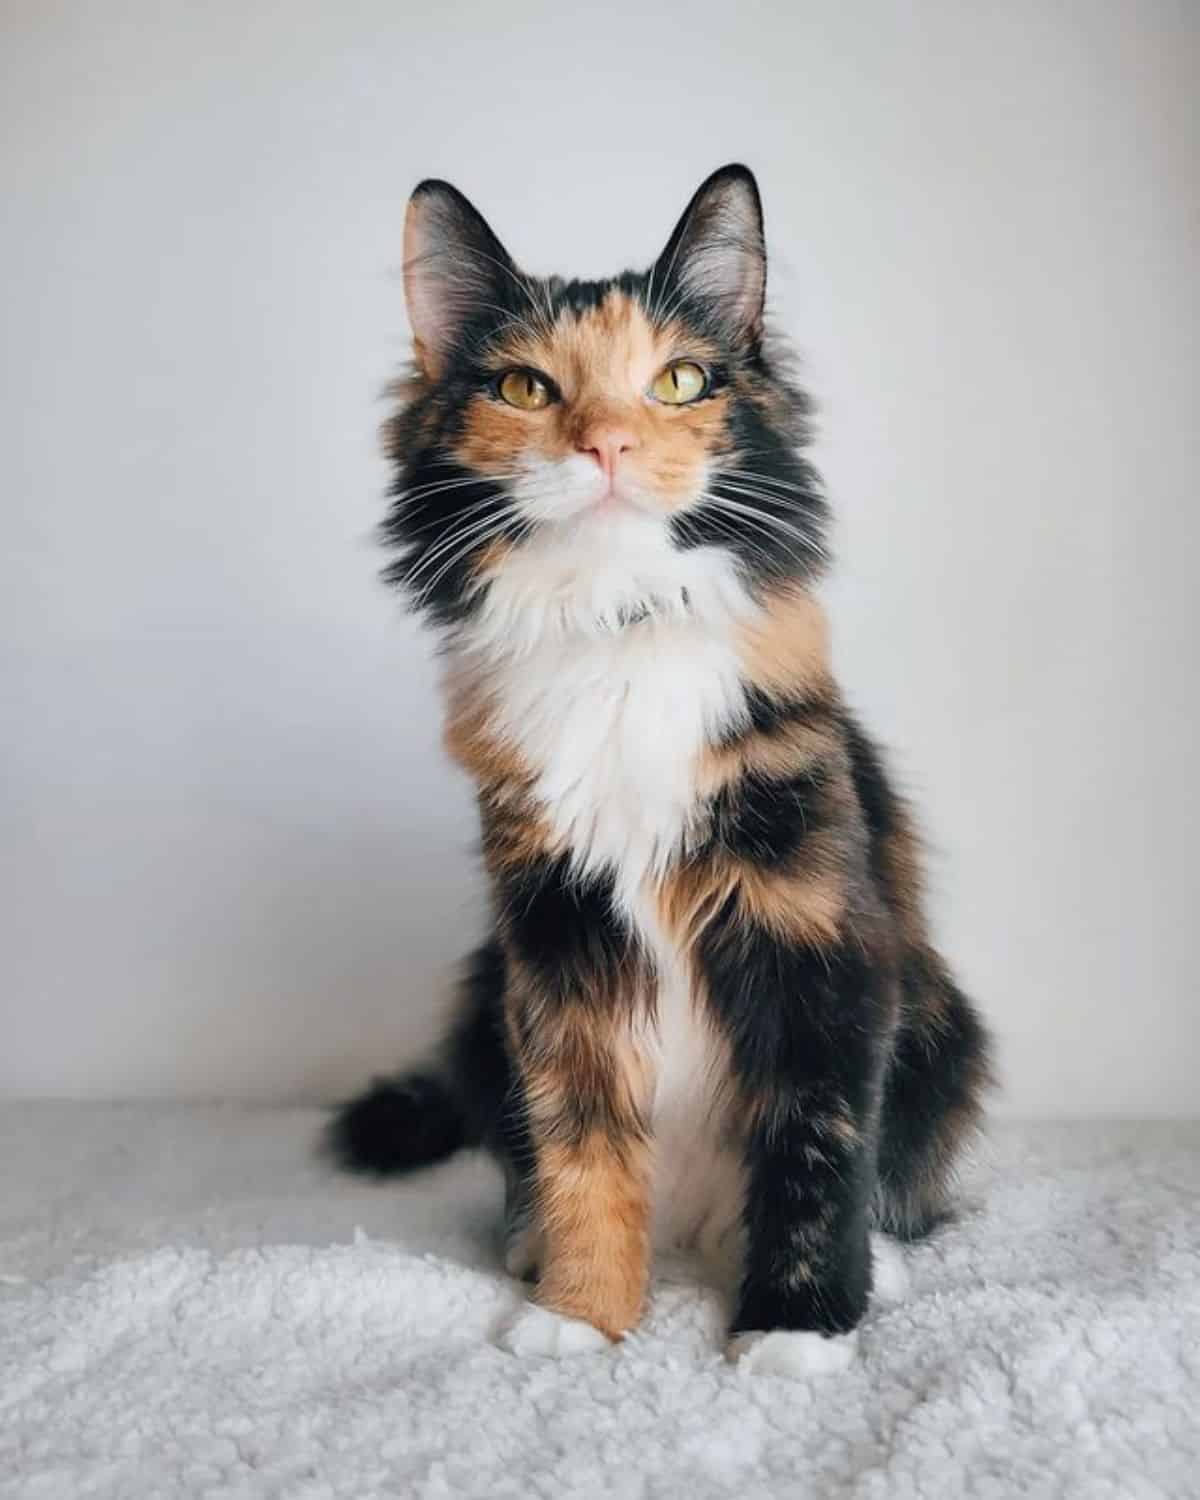 A beautiful calico maine coon sitting on a white blanket.